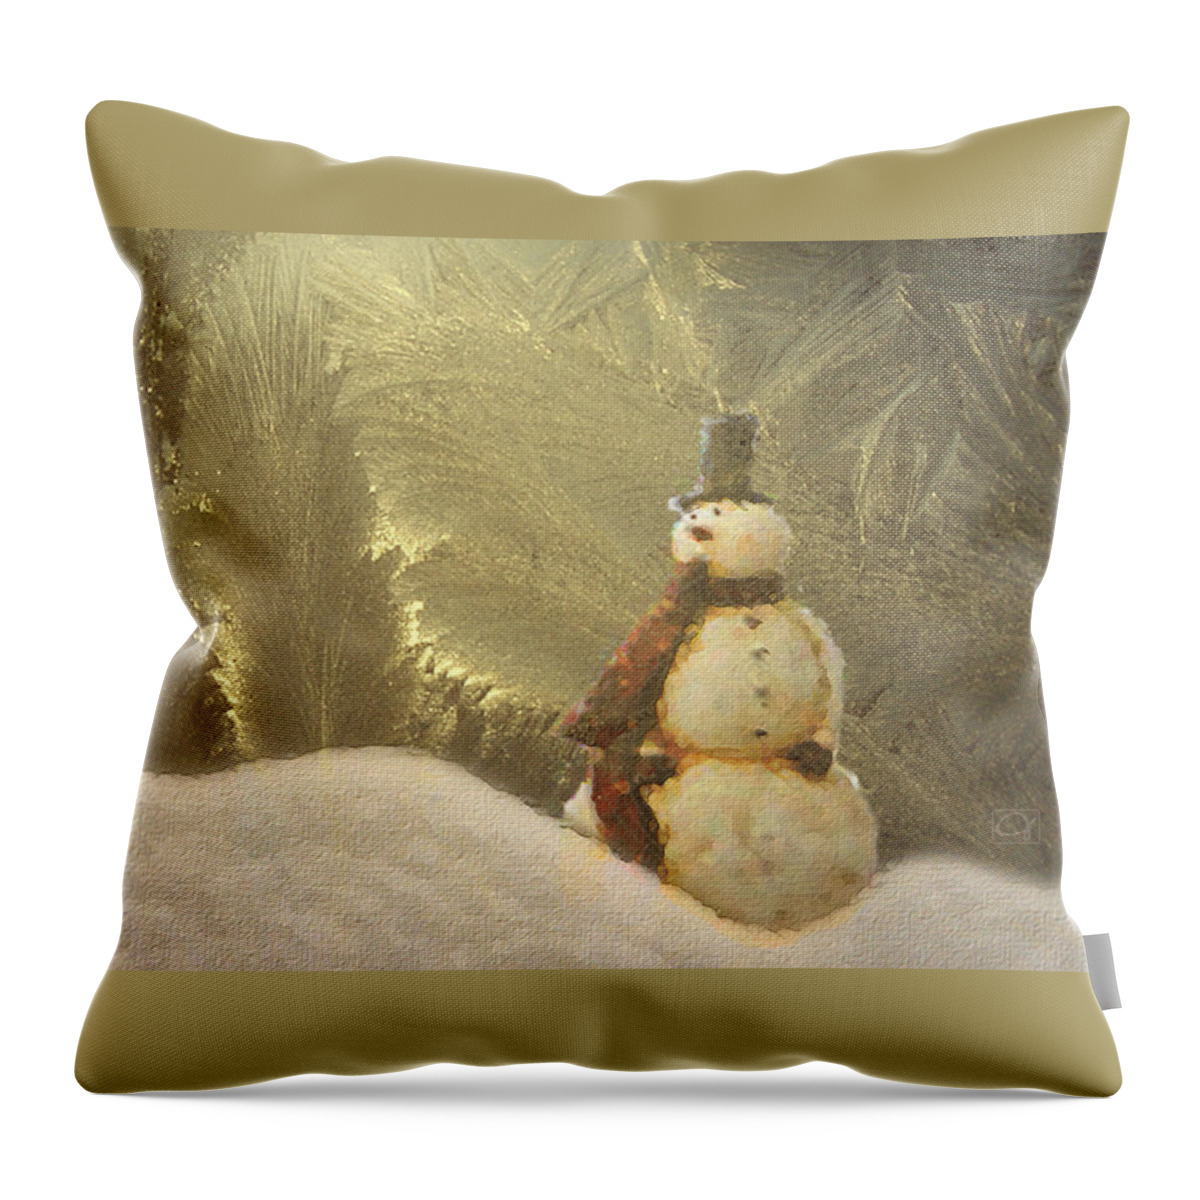 Snowman Throw Pillow featuring the digital art Vintage Snowman by Jean Moore